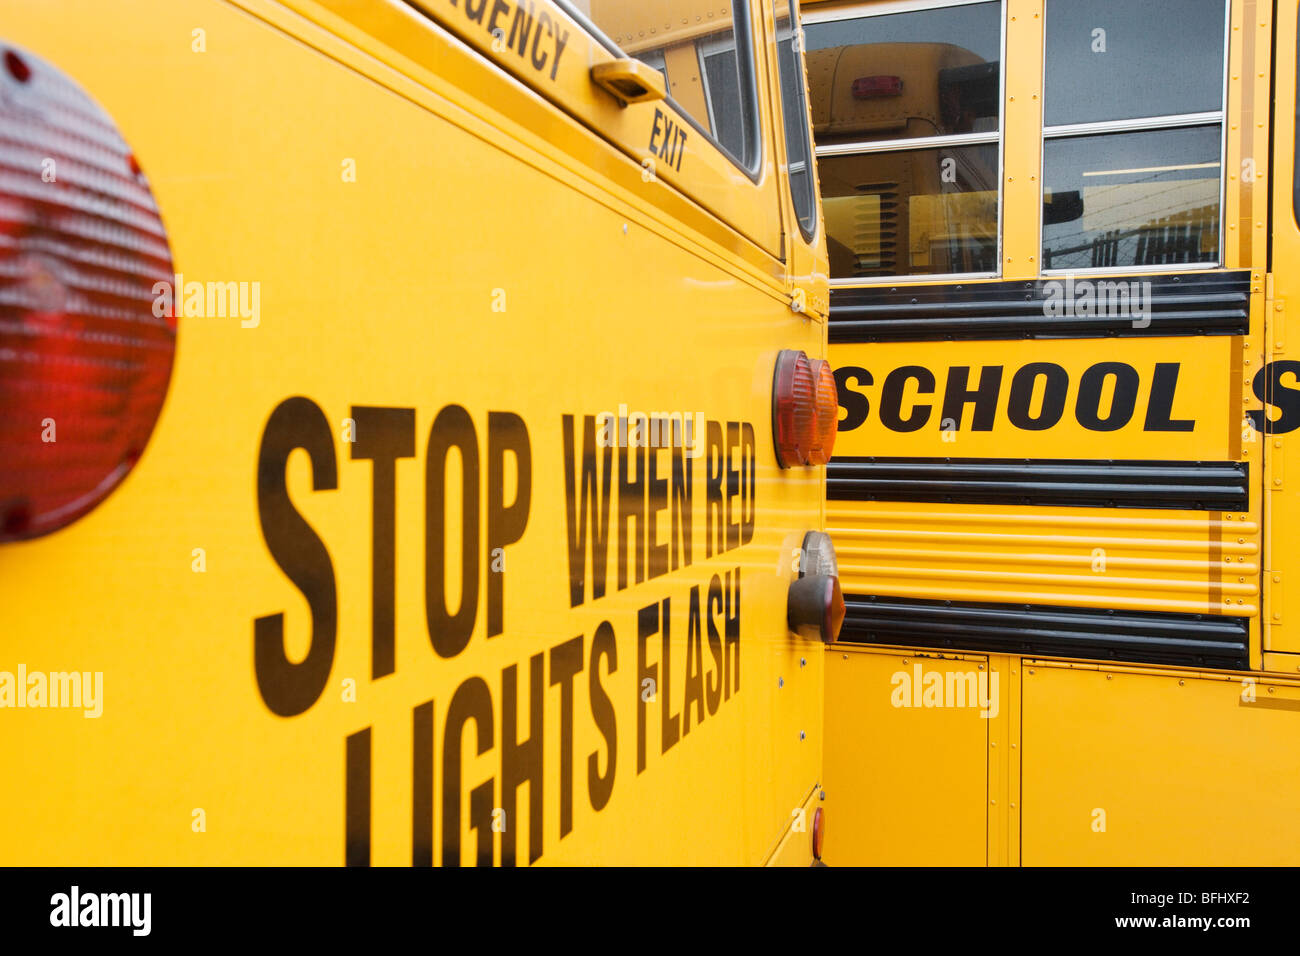 Stop When Red Lights Flash on School Bus Stock Photo